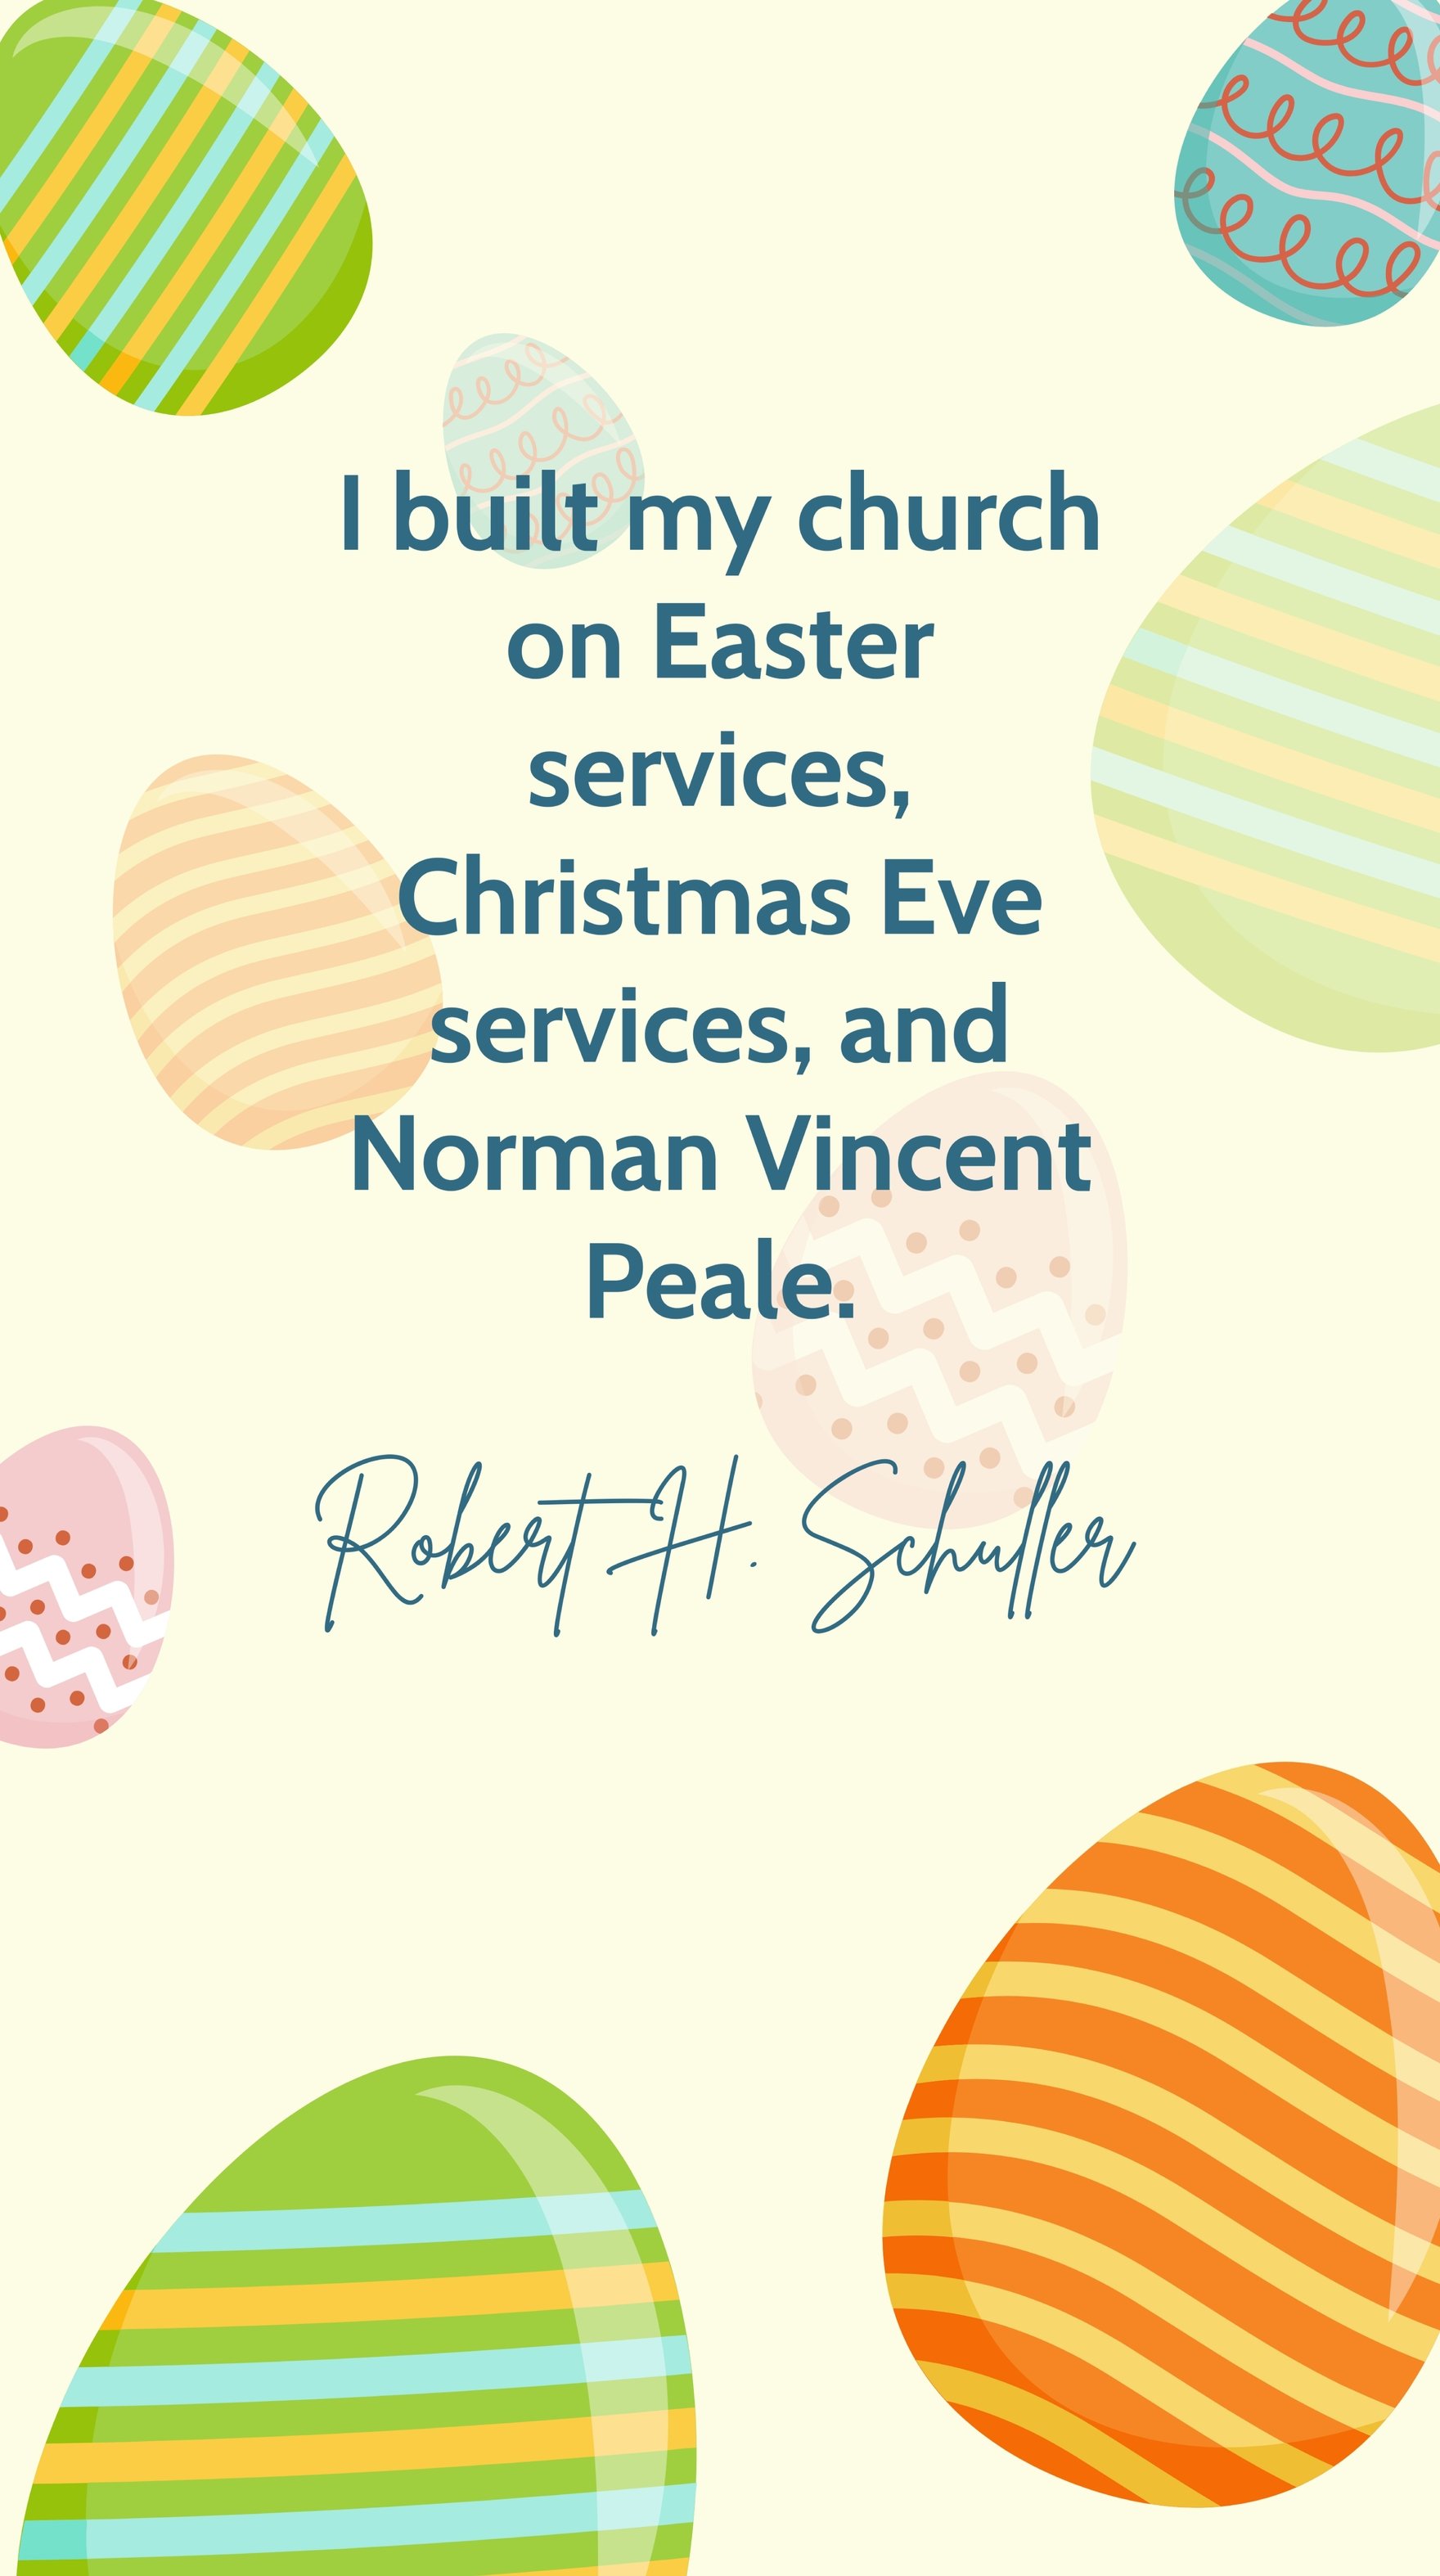 Robert H. Schuller - I built my church on Easter services, Christmas Eve services, and Norman Vincent Peale.